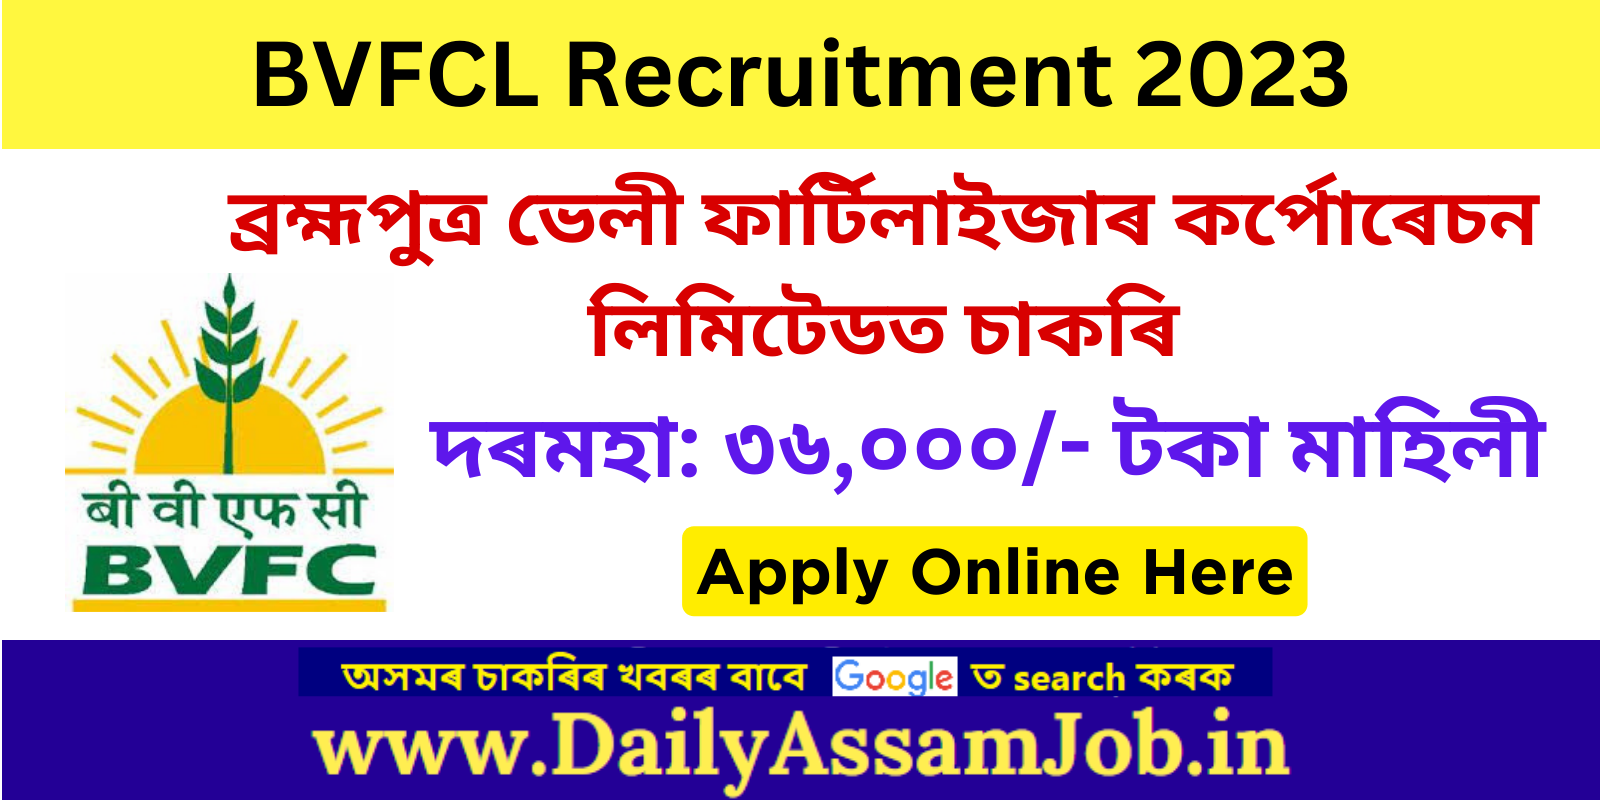 Assam Career :: BVFCL Recruitment 2023 for 18 Manager & Engineer Vacancy